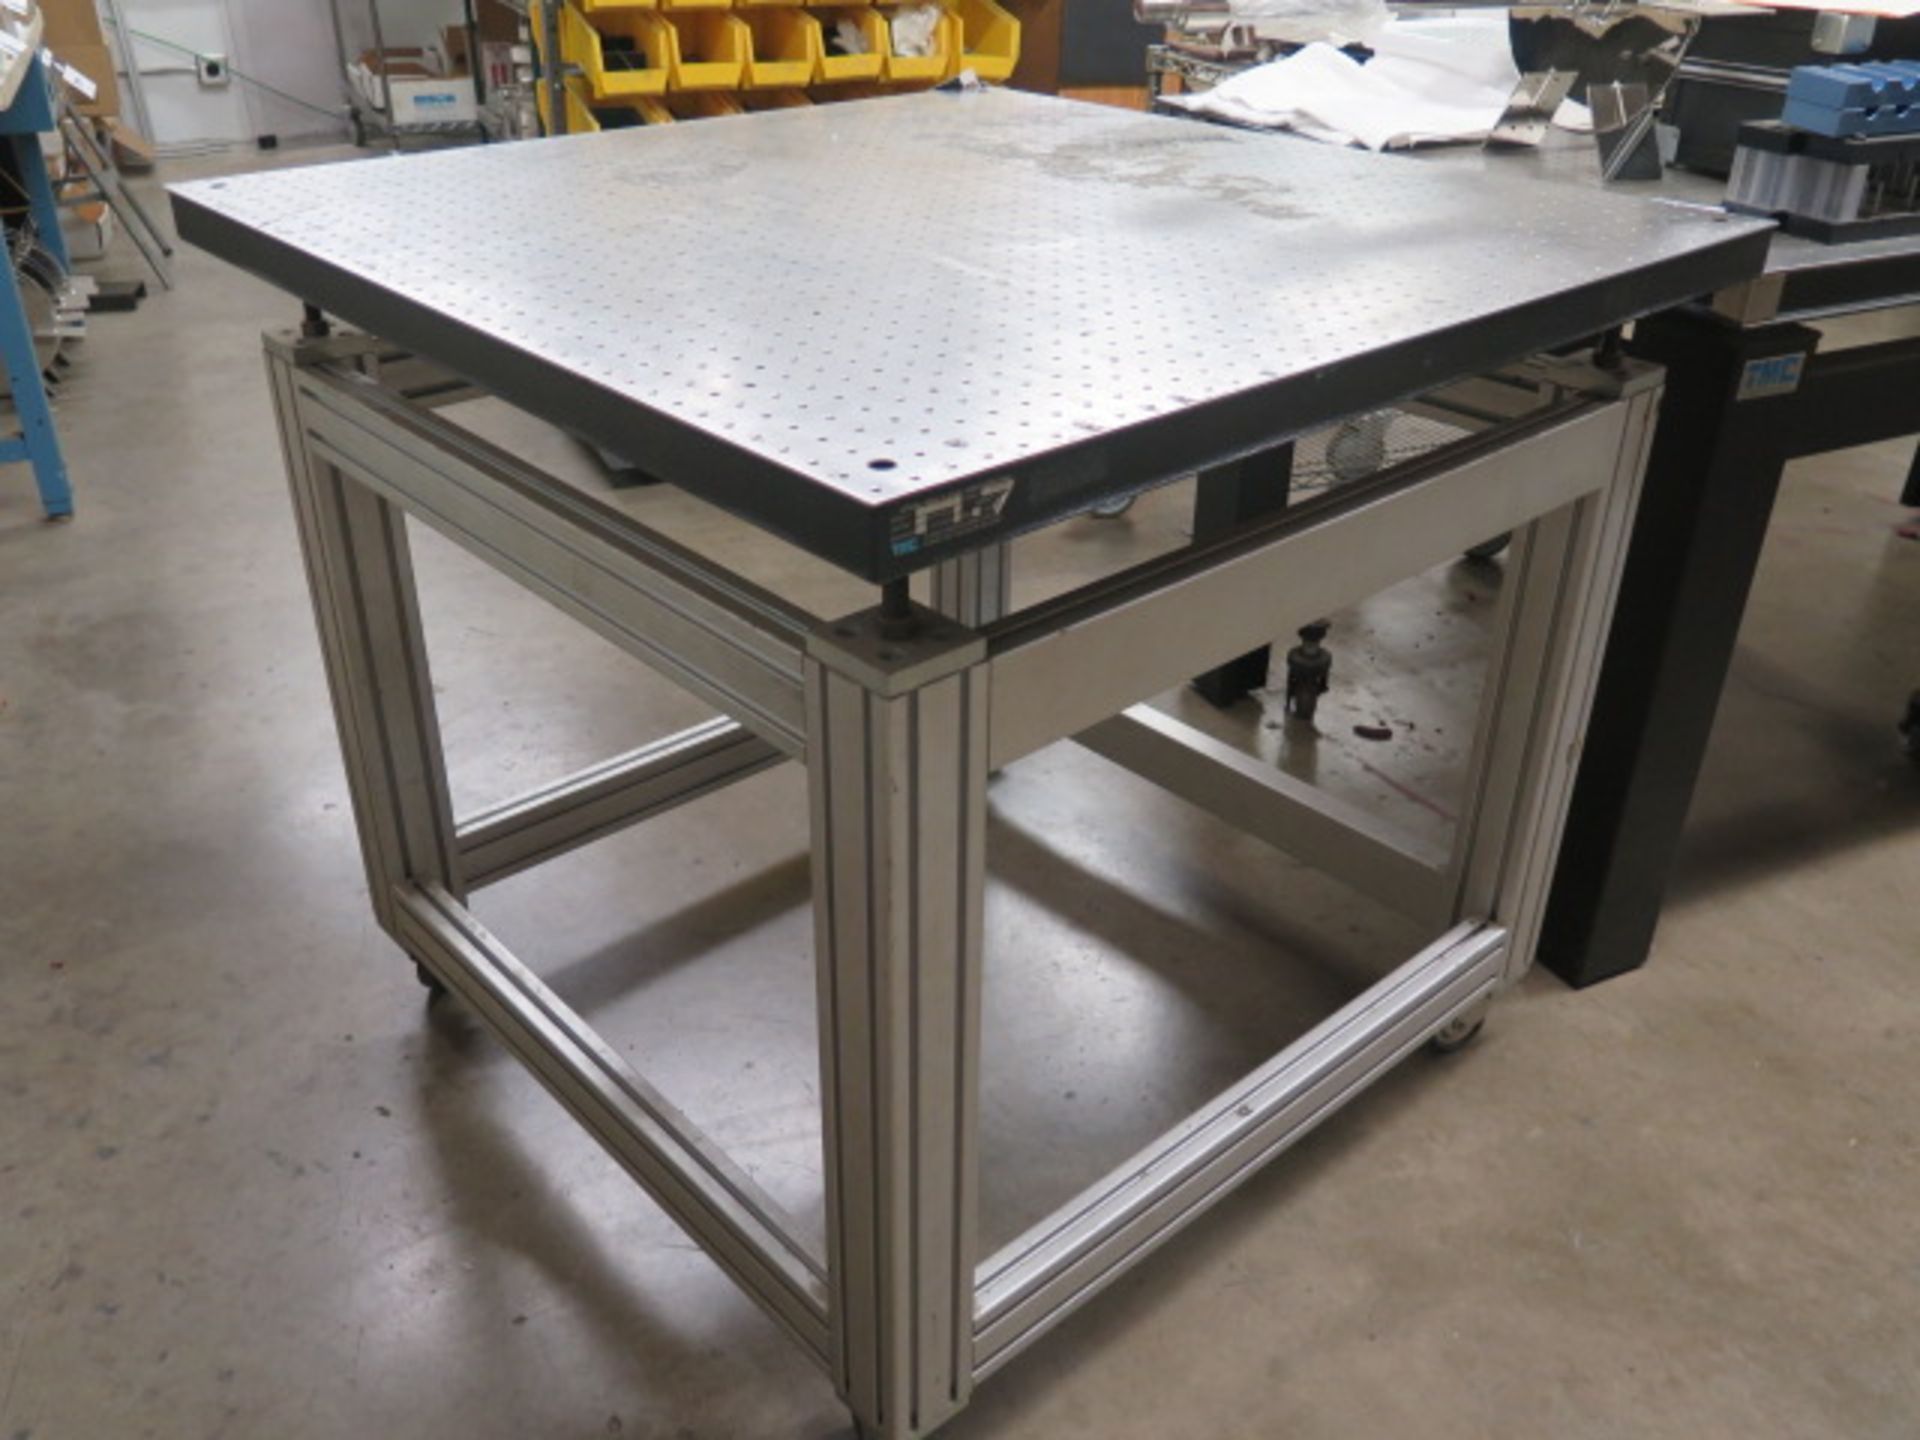 TMC 39” x 39” Honeycomb Technical Lab Test Table w/ Wheels (SOLD AS-IS - NO WARRANTY) - Image 3 of 8